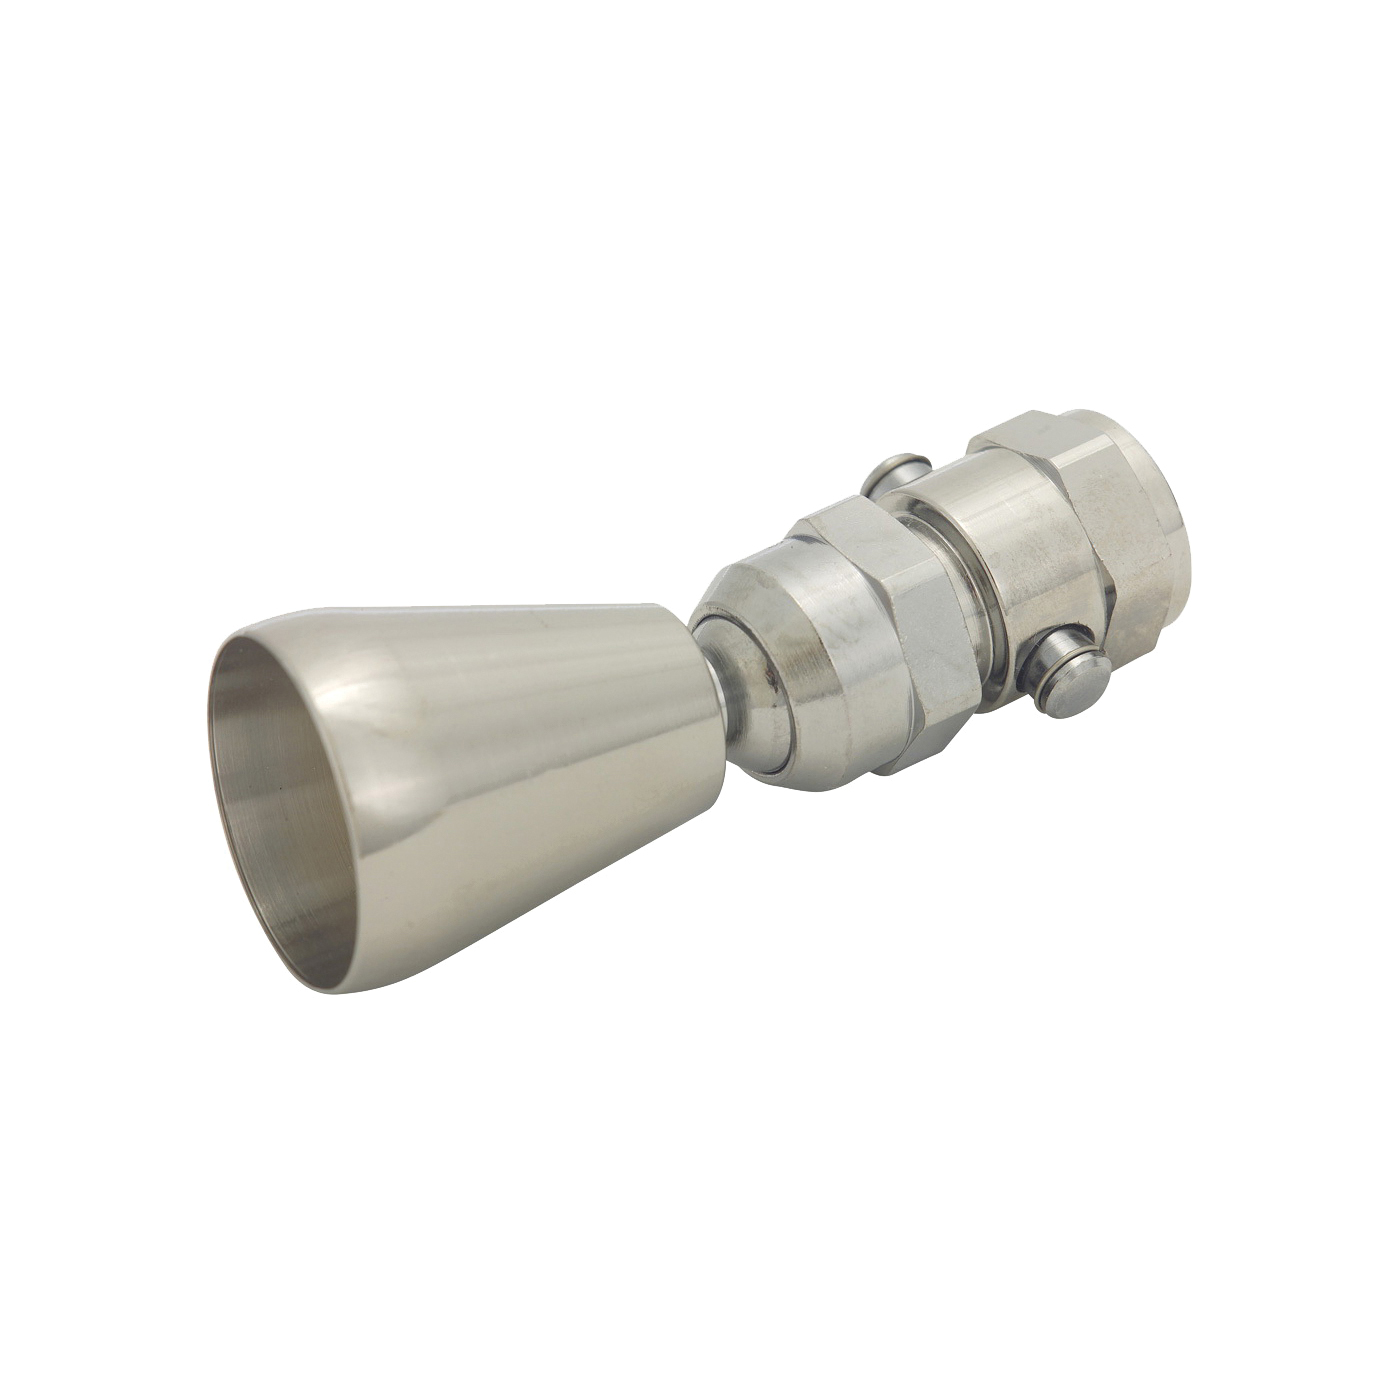 SaverShower Series USD2C/DS2C Shower Head with Trickle Valve, 2.5 gpm, 1/2 in Connection, Female, Brass, Chrome